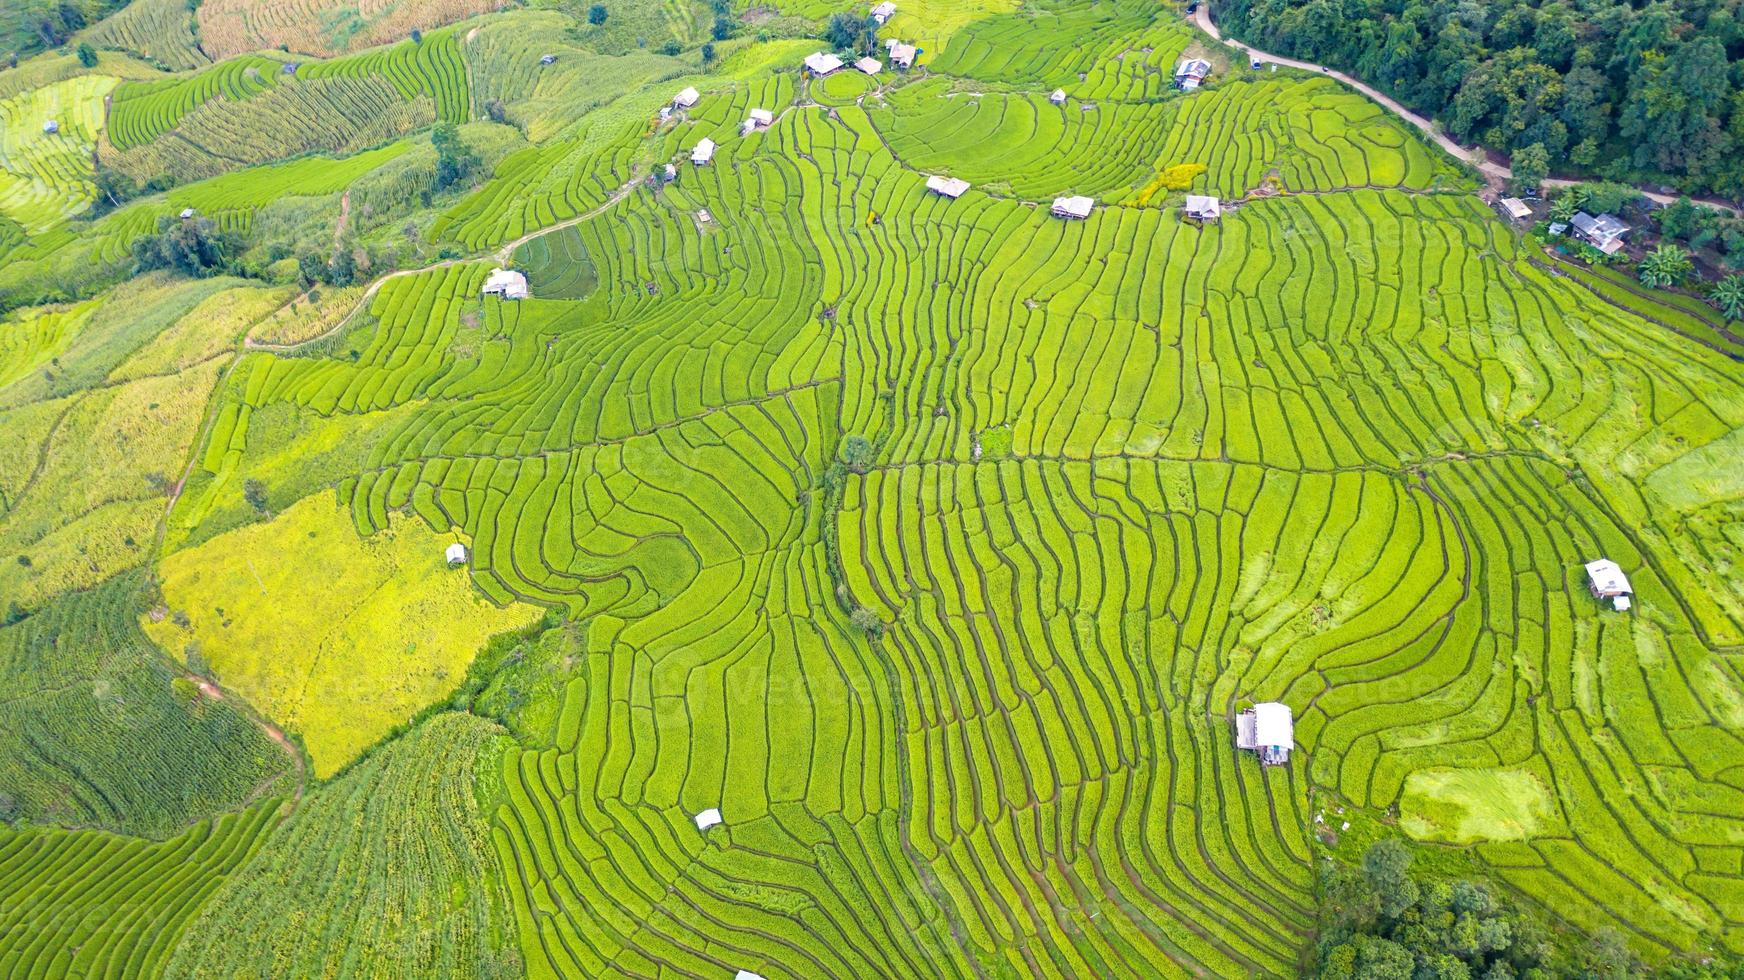 Aerial view of the green terraced rice fields photo